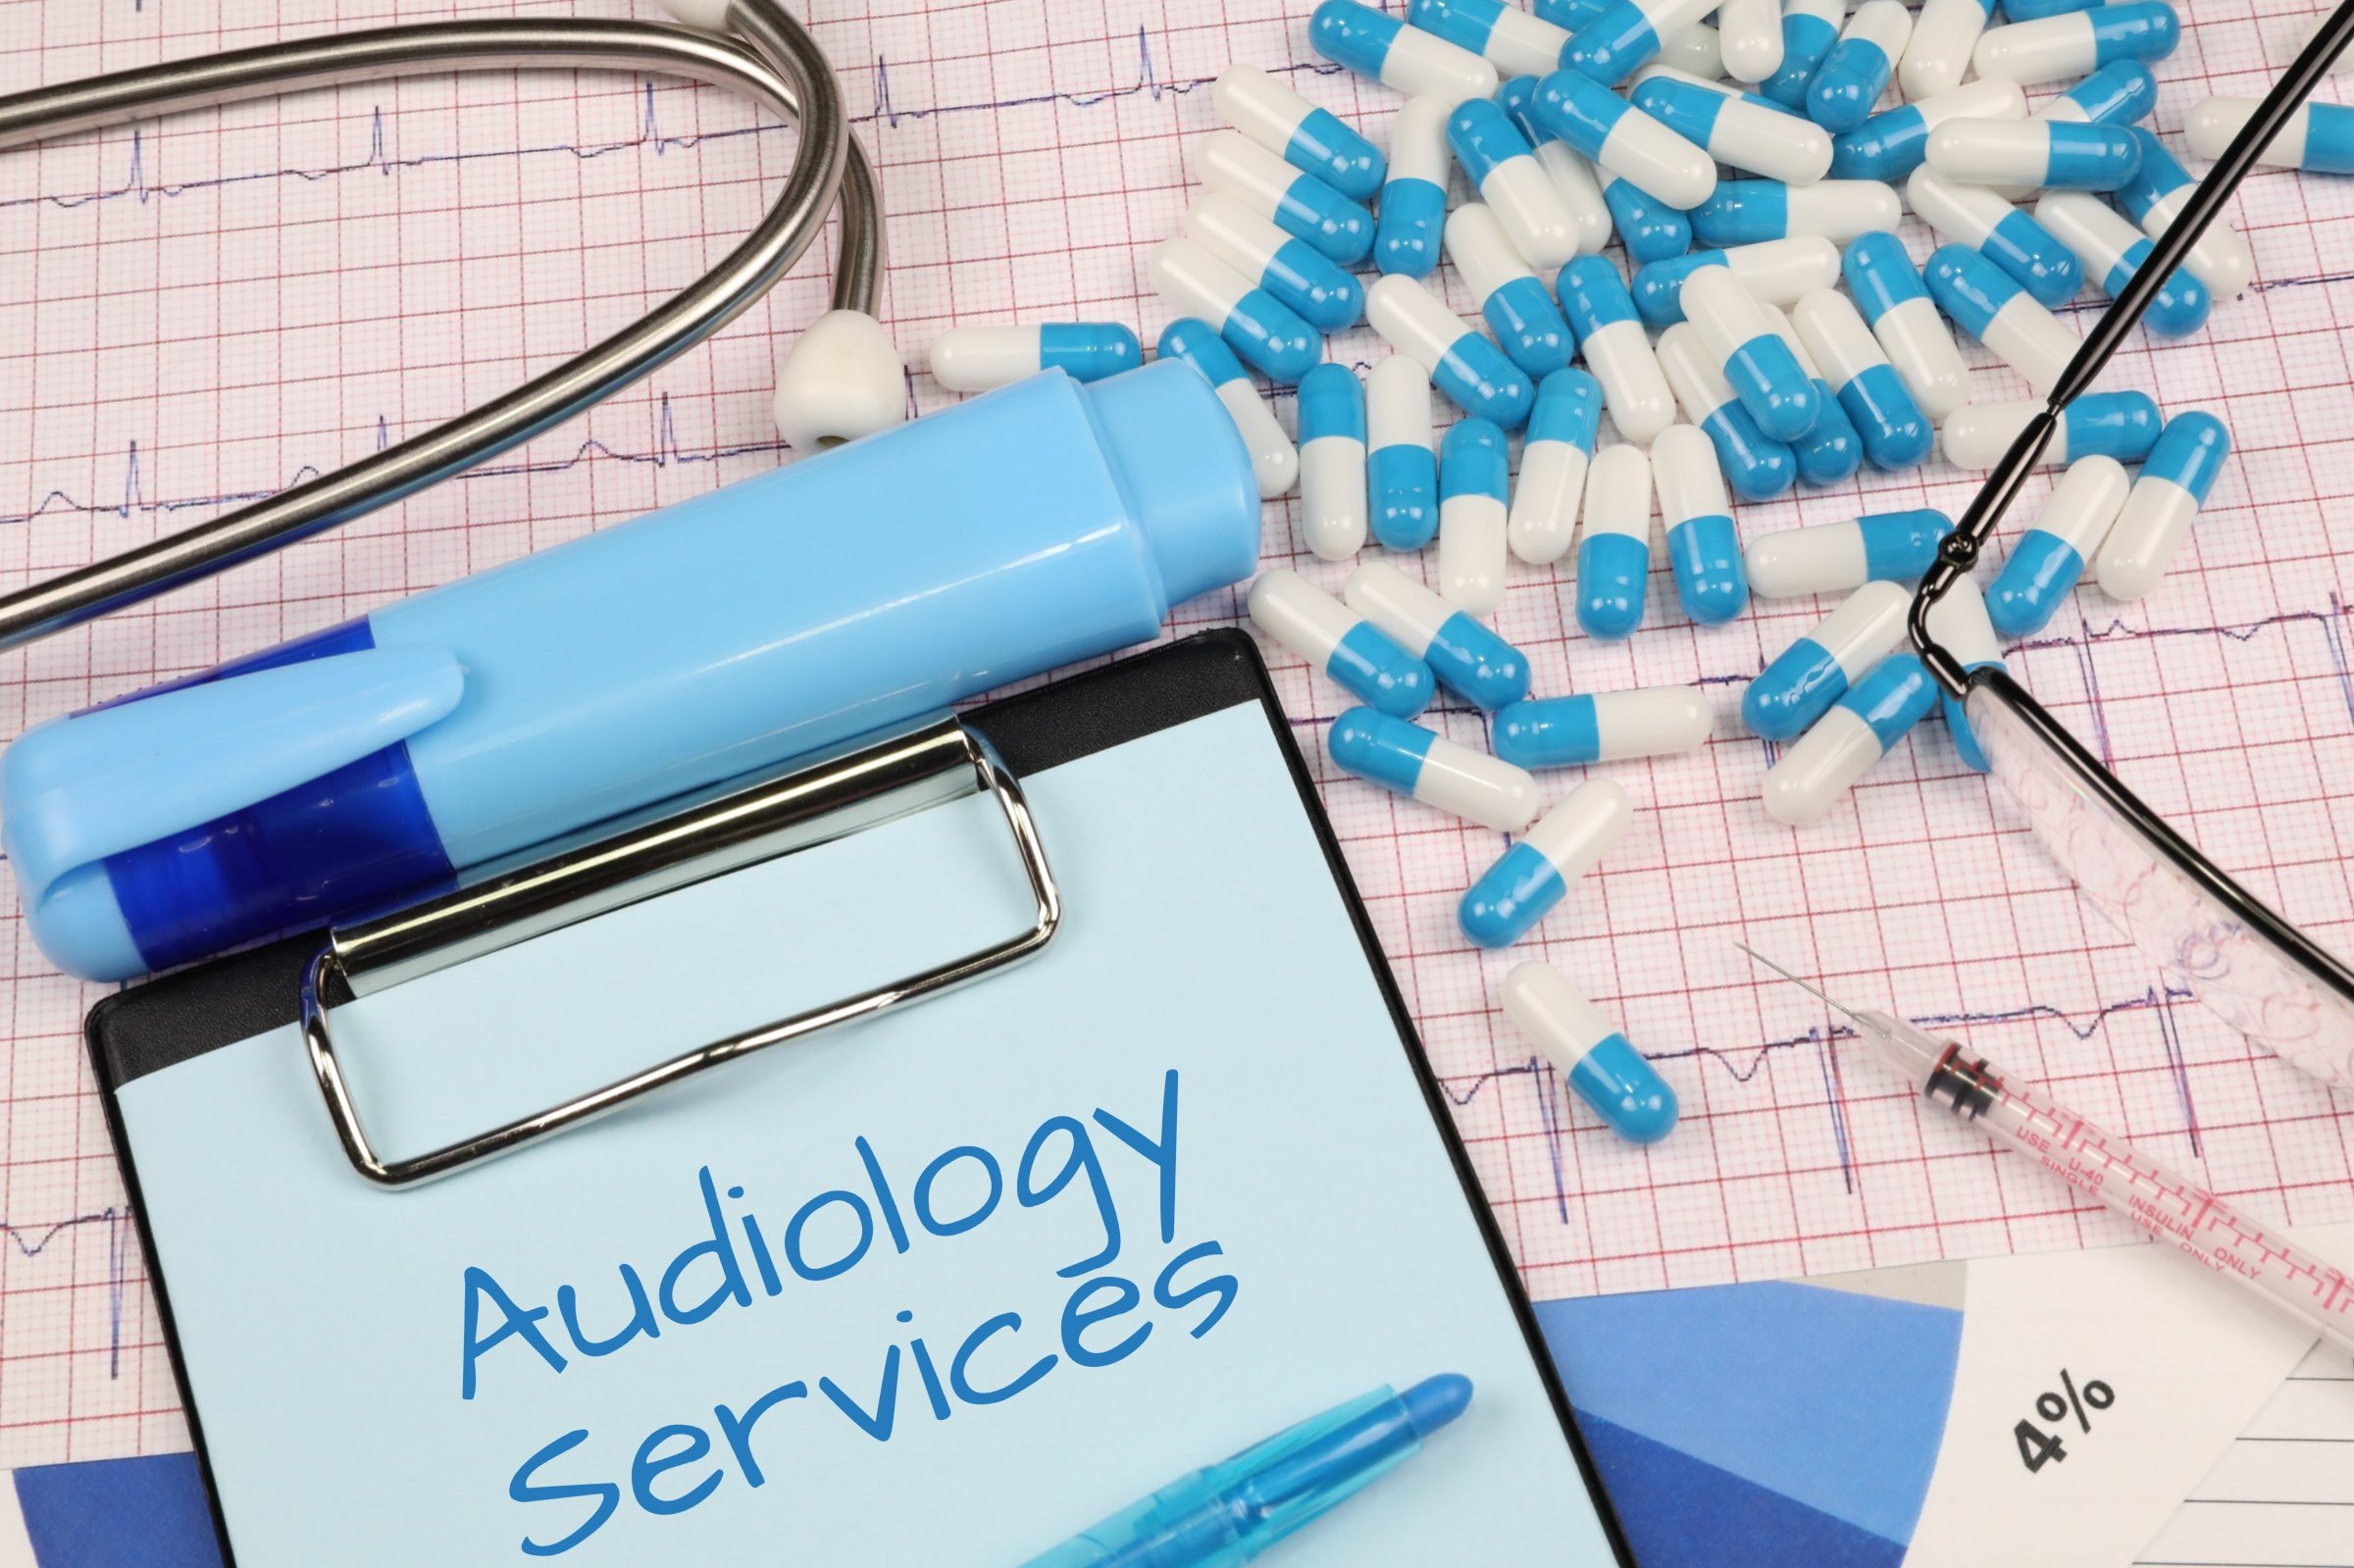 audiology services